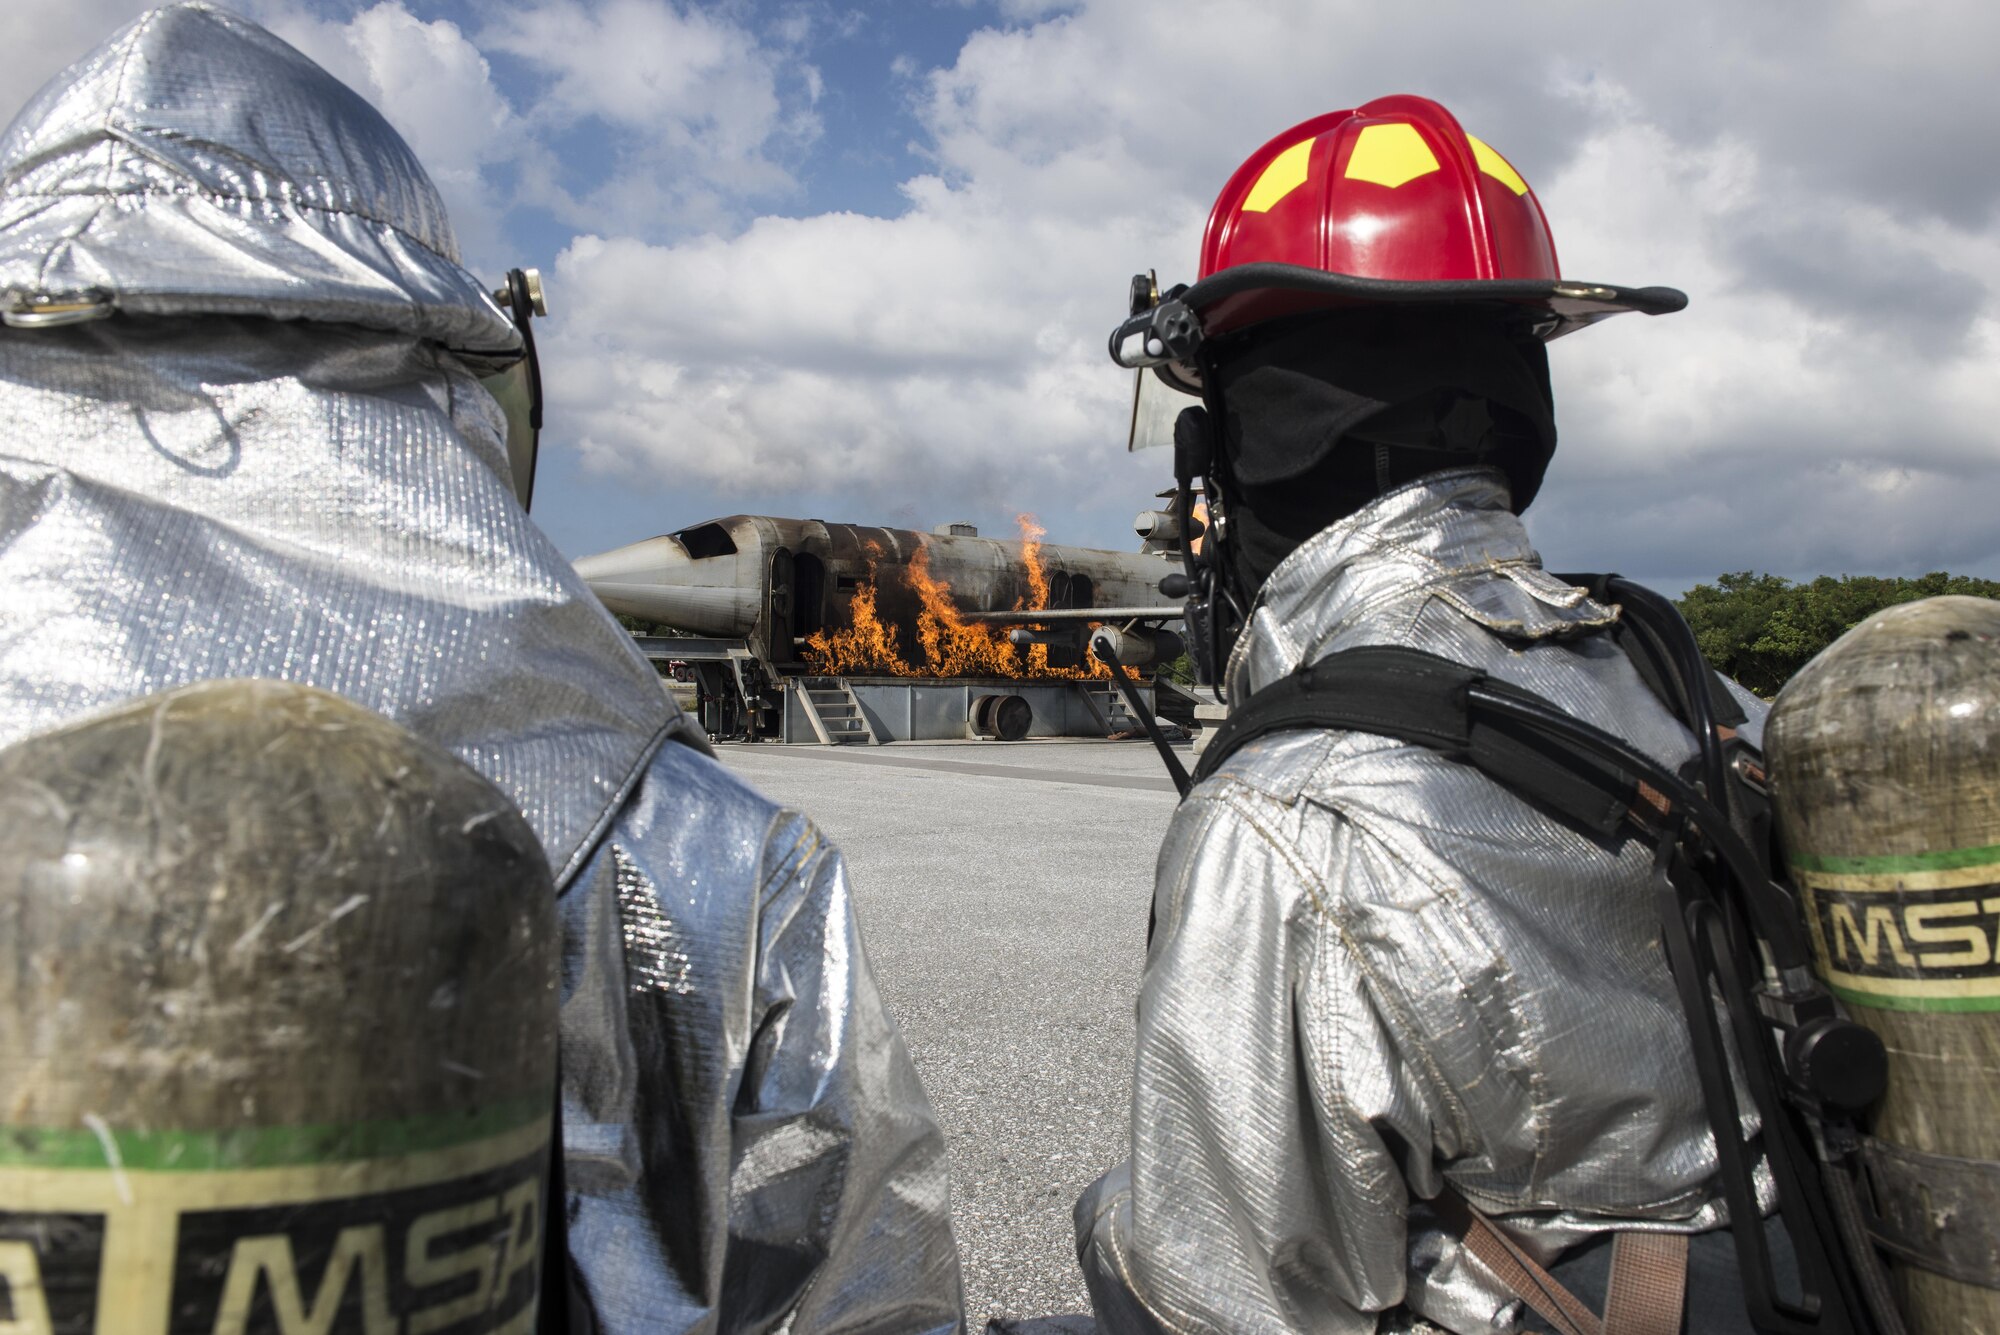 Kadena Fire Department firefighters conduct live-fire training with firefighter cadets from Tokyo and Okinawa, Nov. 24, 2015, at the fire training pit on Kadena Air Base, Japan. The fire department demonstrated how they extinguish aircraft fires with the fire trucks on a flight line. (U.S. Air Force photo by Senior Airman Omari Bernard)